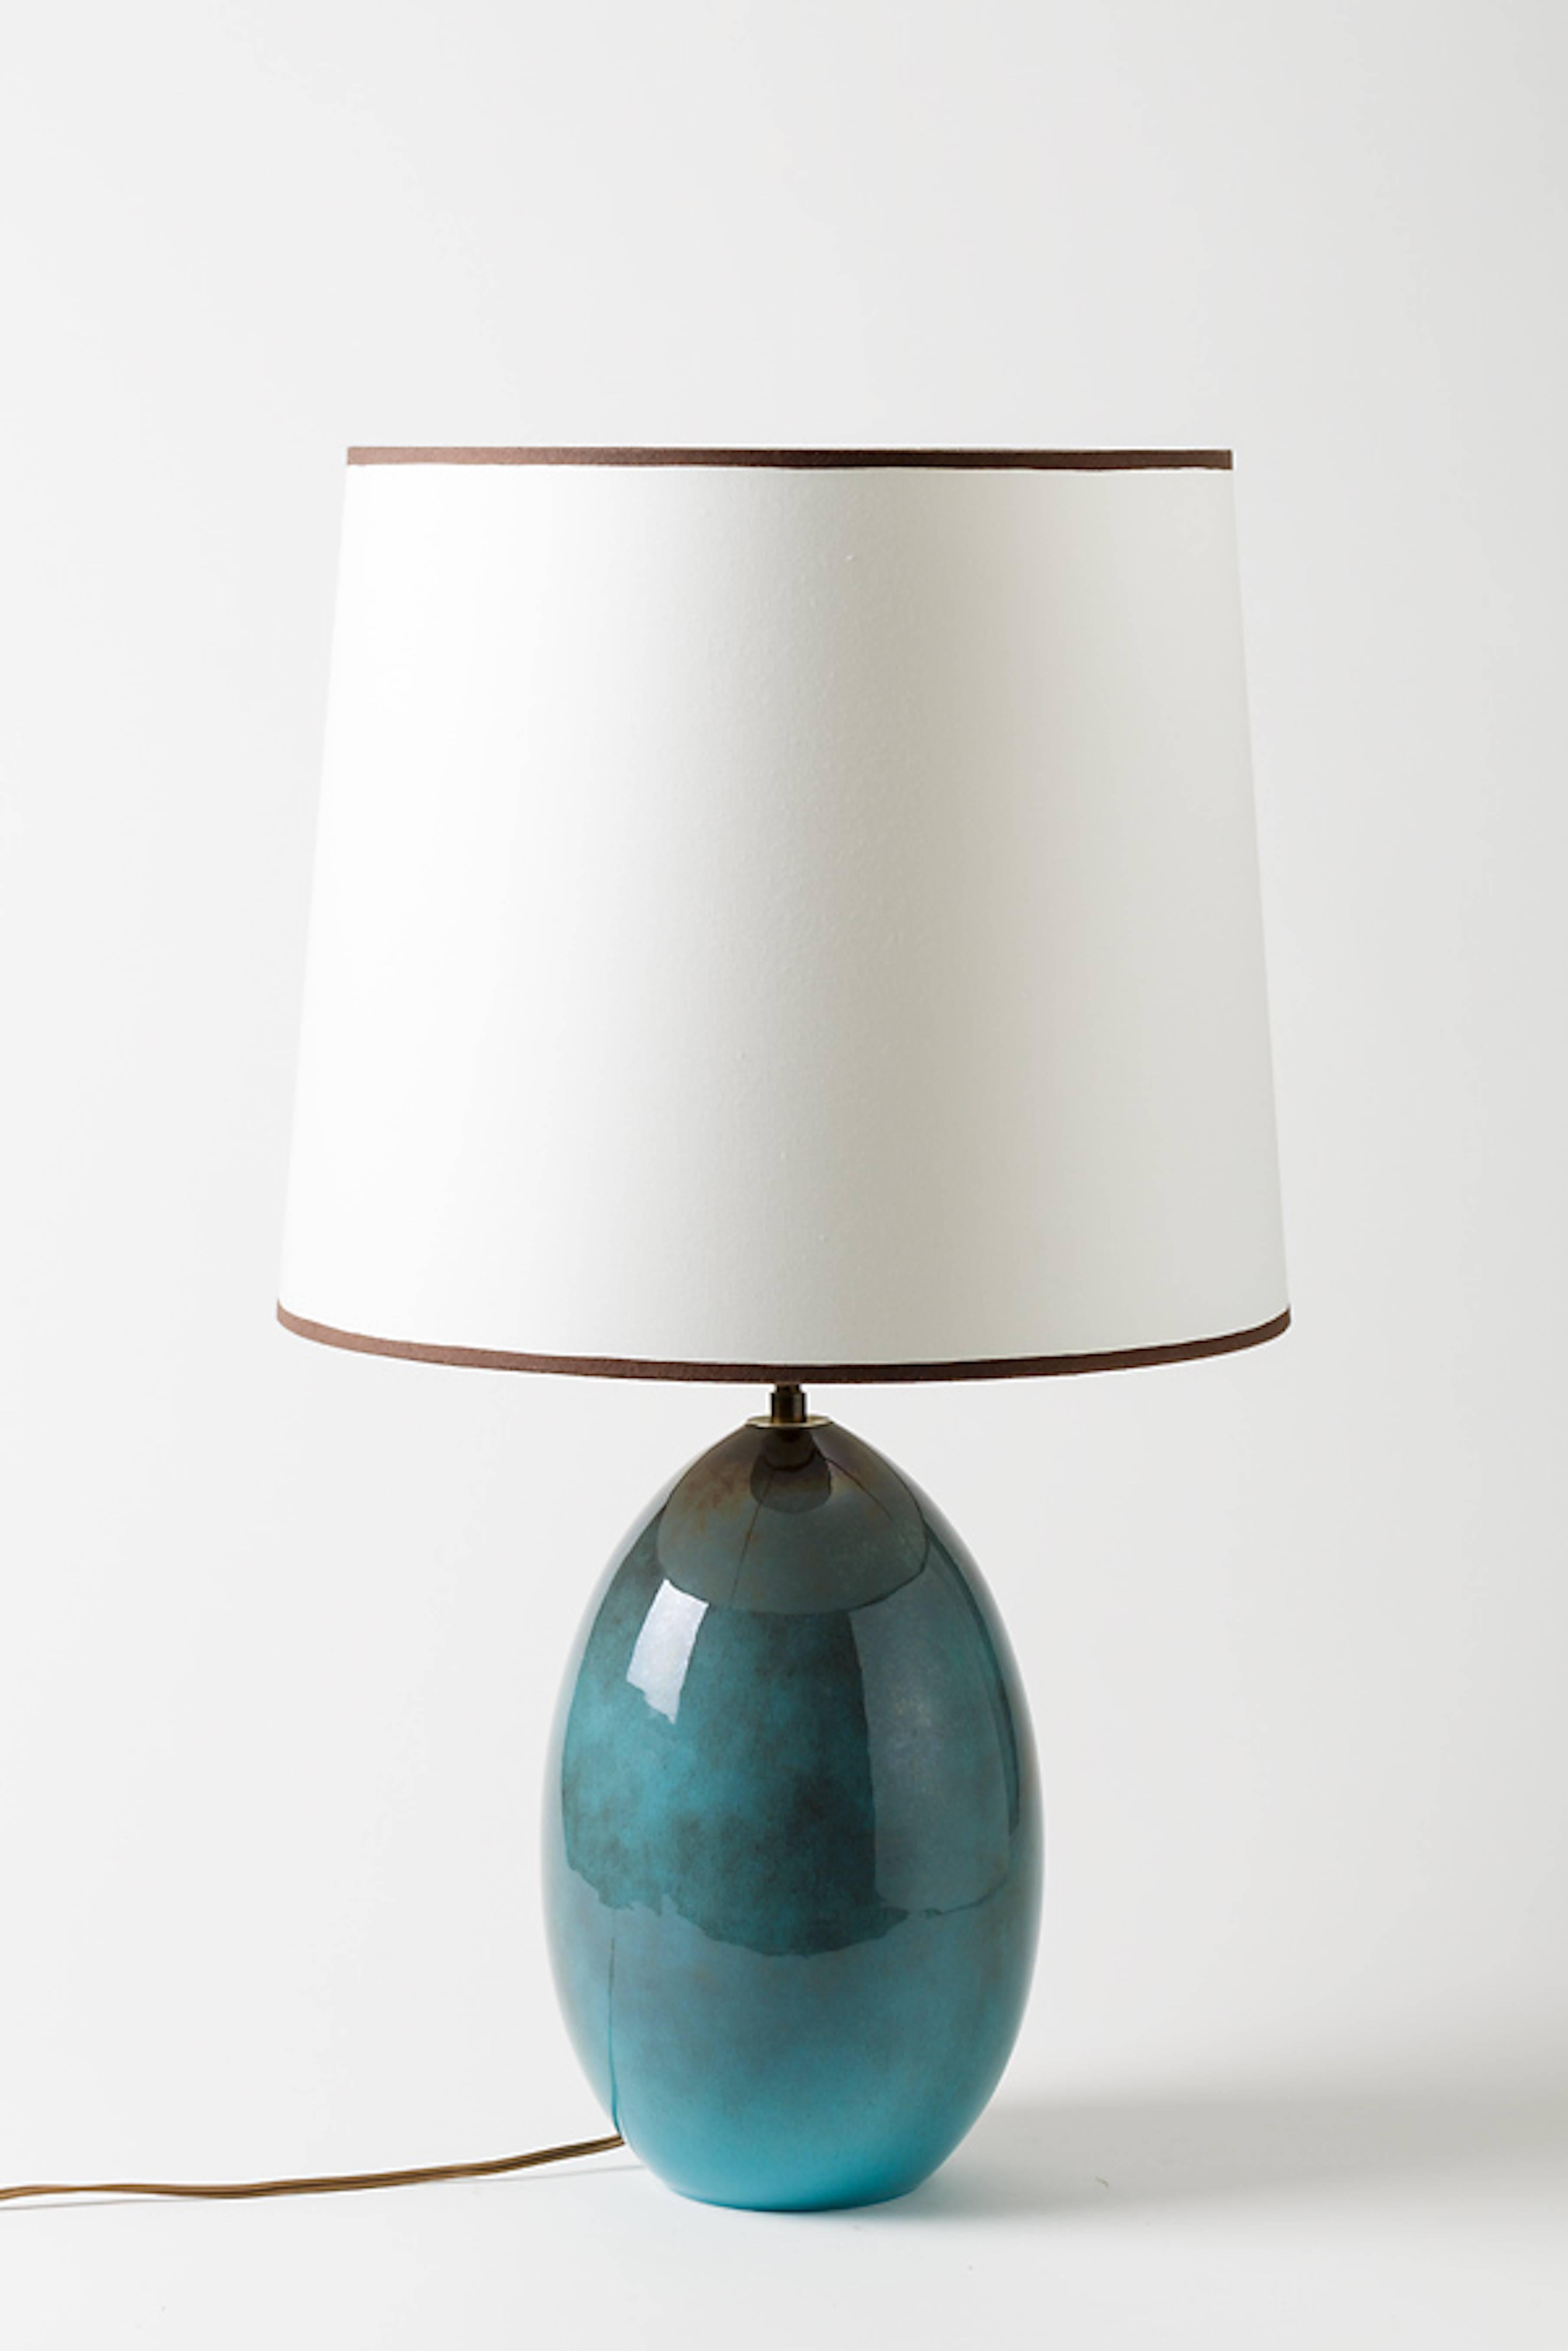 A ceramic lamp by Gabriel Musarra, Vallauris, circa 1960-1970.
Perfect original conditions.
Sold with lamp shade and new European electrical system.

Diameter: 15 cm / 6' inch.

Height (ceramic only): 28 cm / 11' inch.

Height (ceramic and